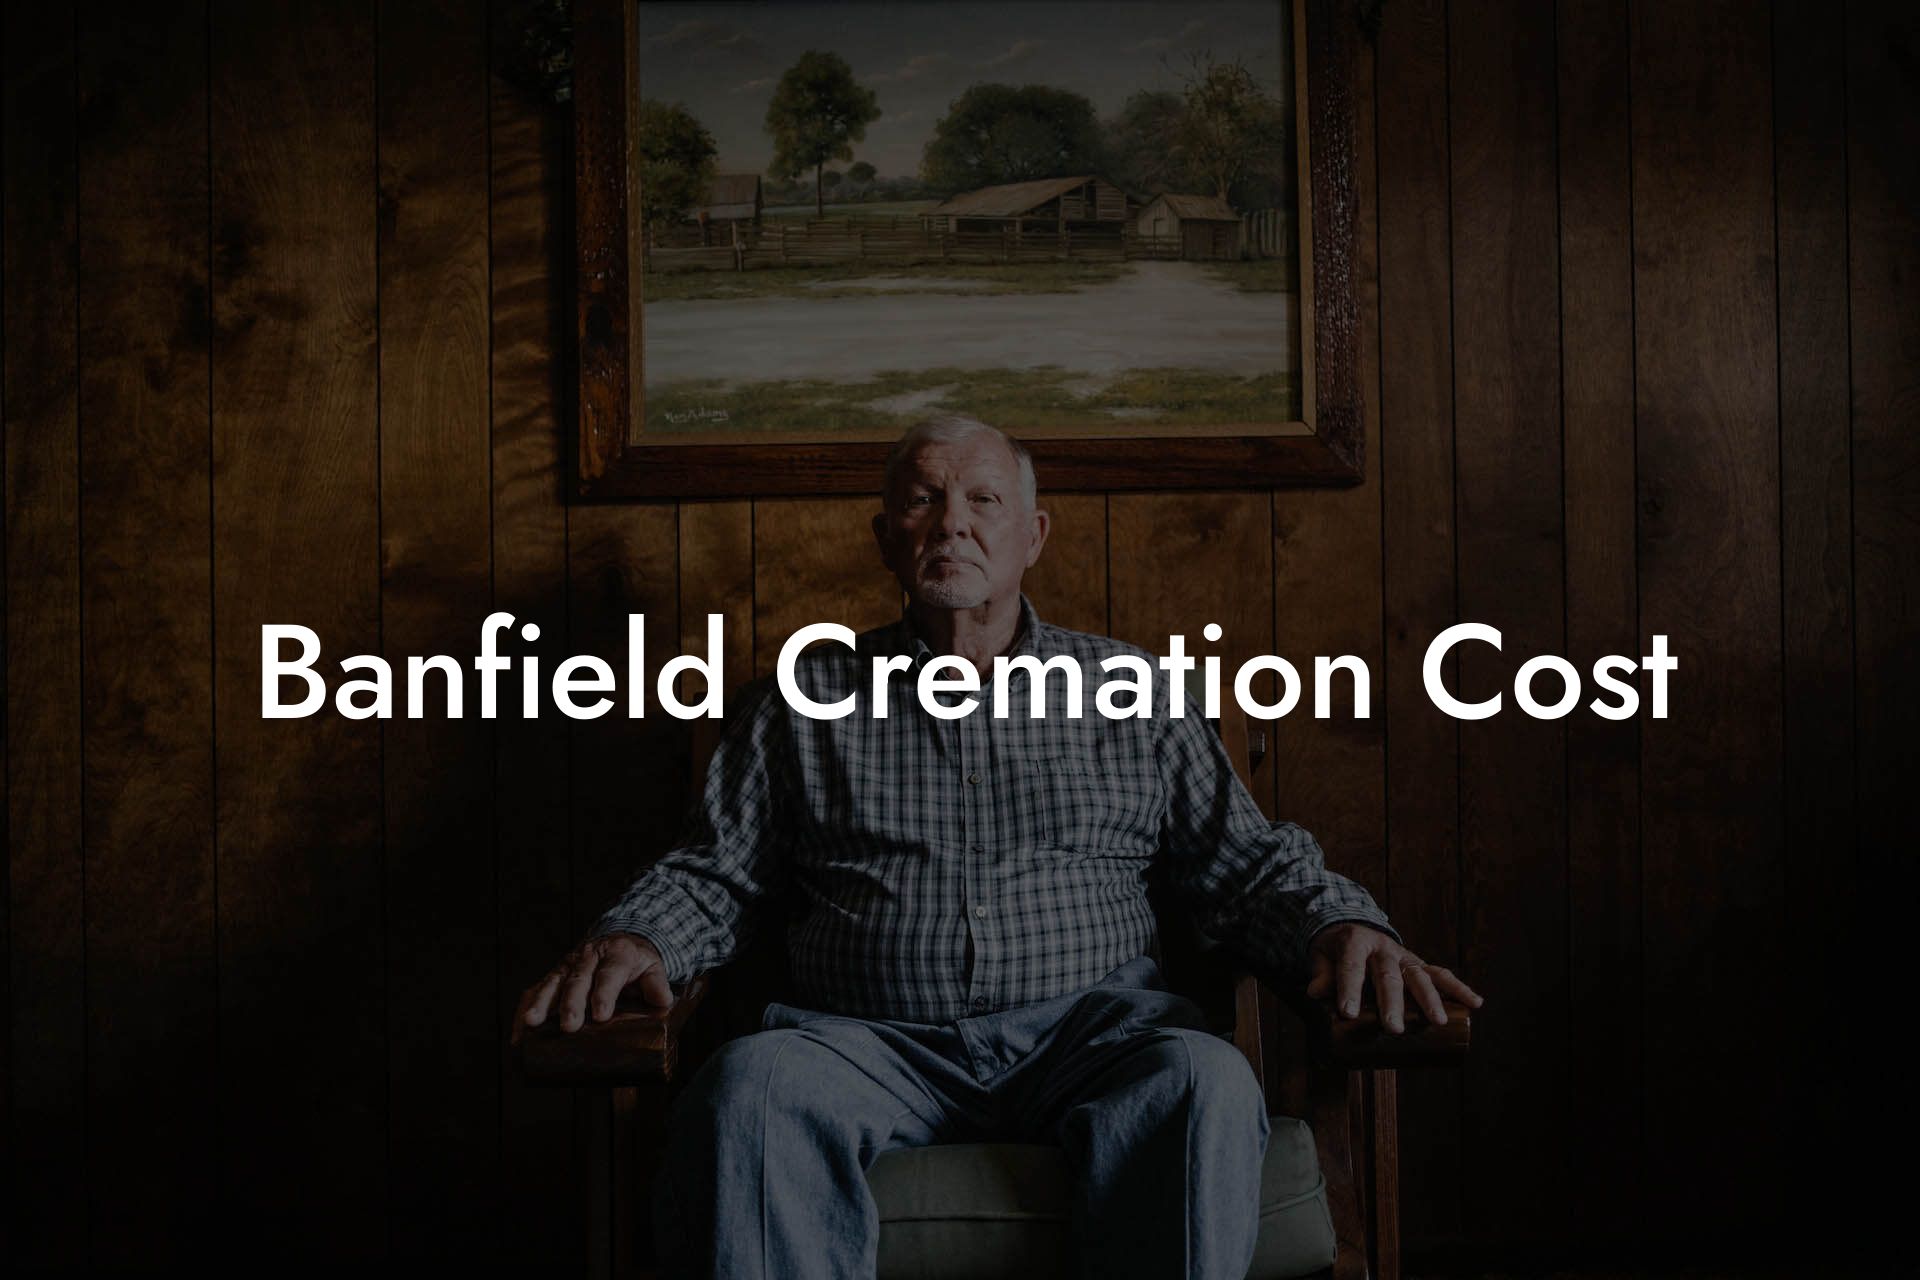 Banfield Cremation Cost